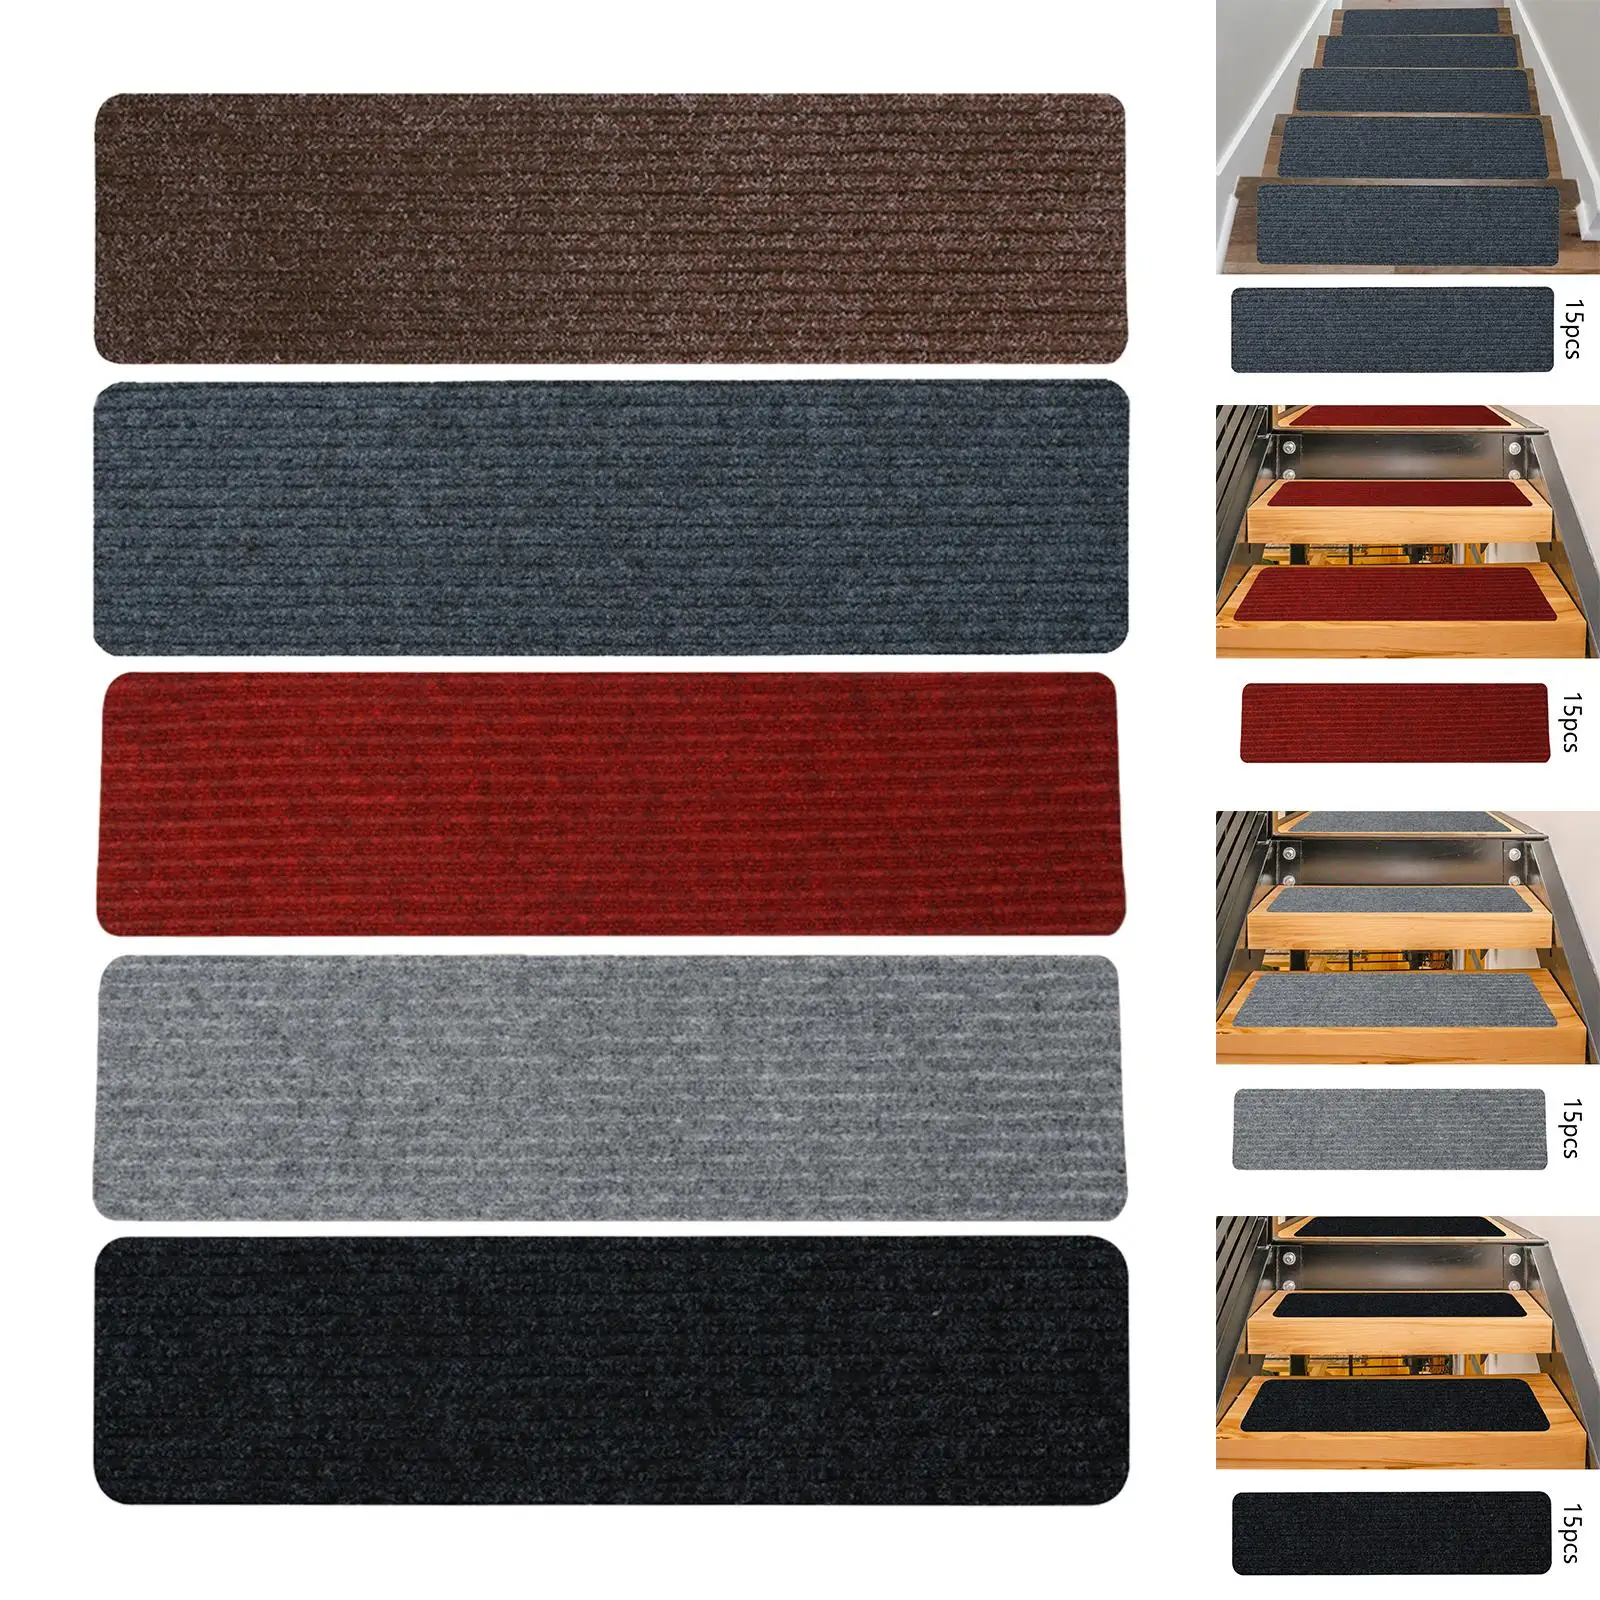 15 Pieces Non Skid Safety Rug Stair Treads Stair Rugs Stair Runner for Kids Elders Wooden Steps Pets Dogs